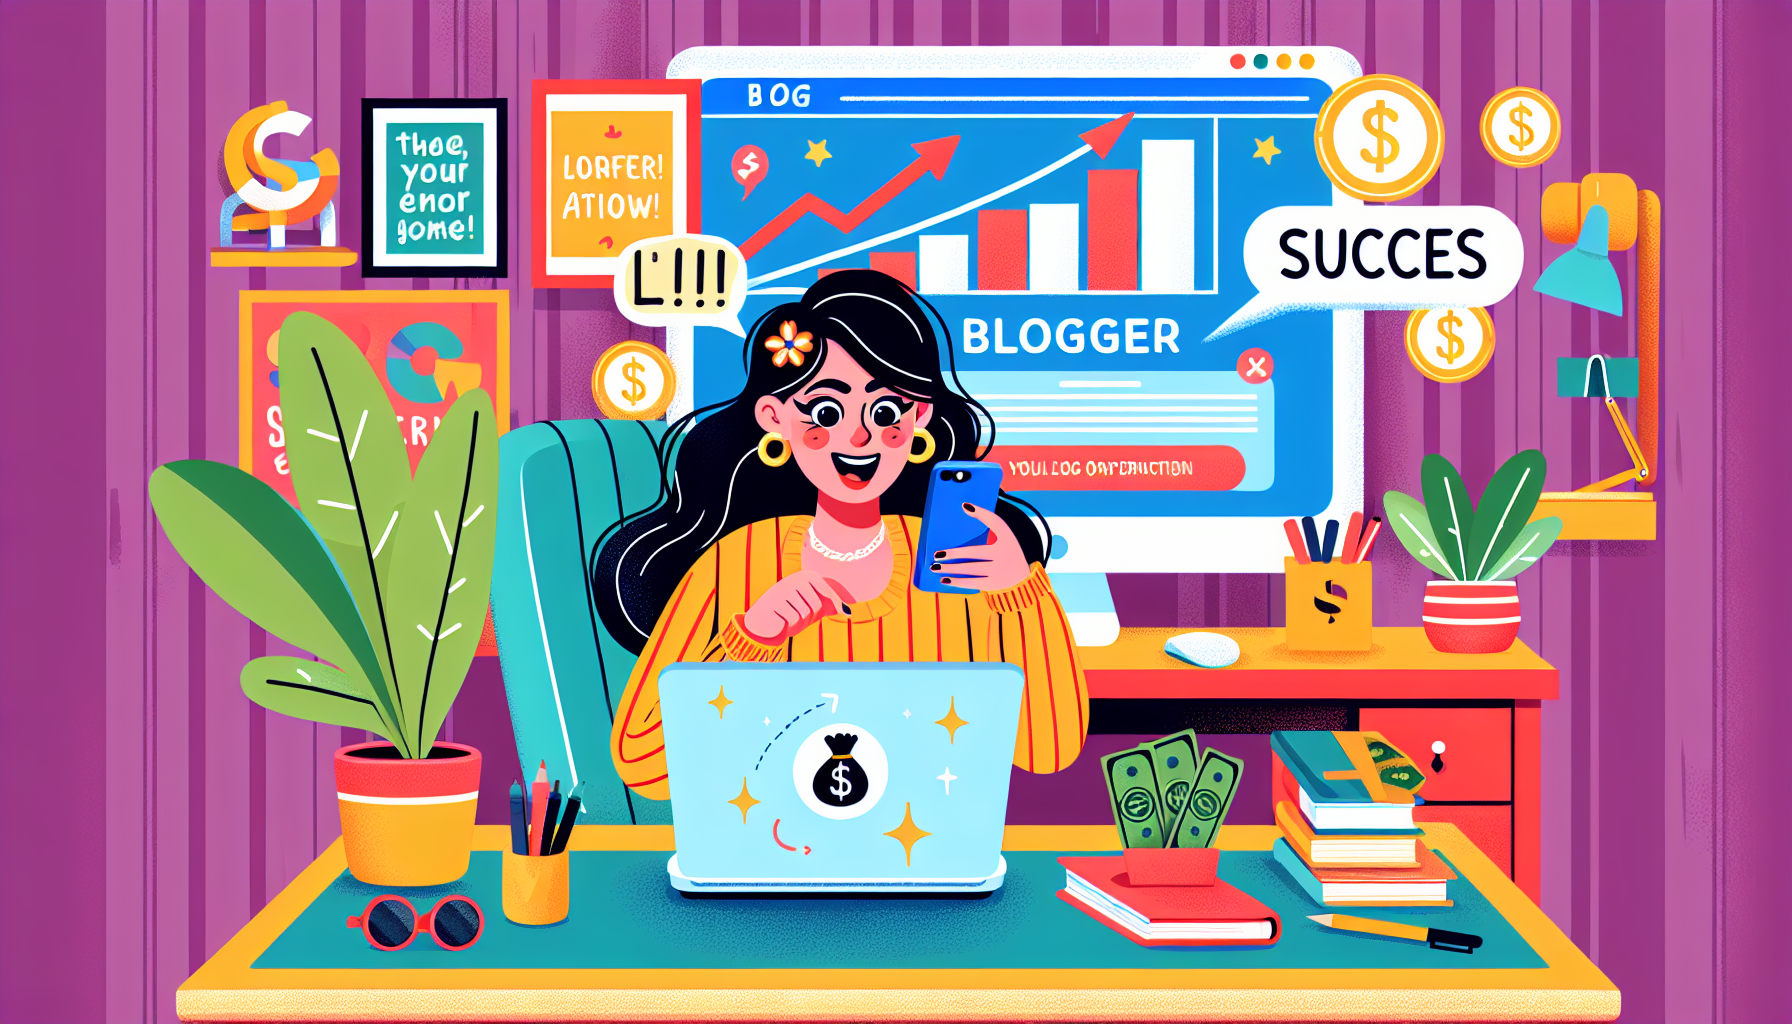 Create an illustration showing a blogger in a cozy home office setting earning money from their blog. The image should feature a laptop with a blog interface on the screen, surrounded by charts, graph